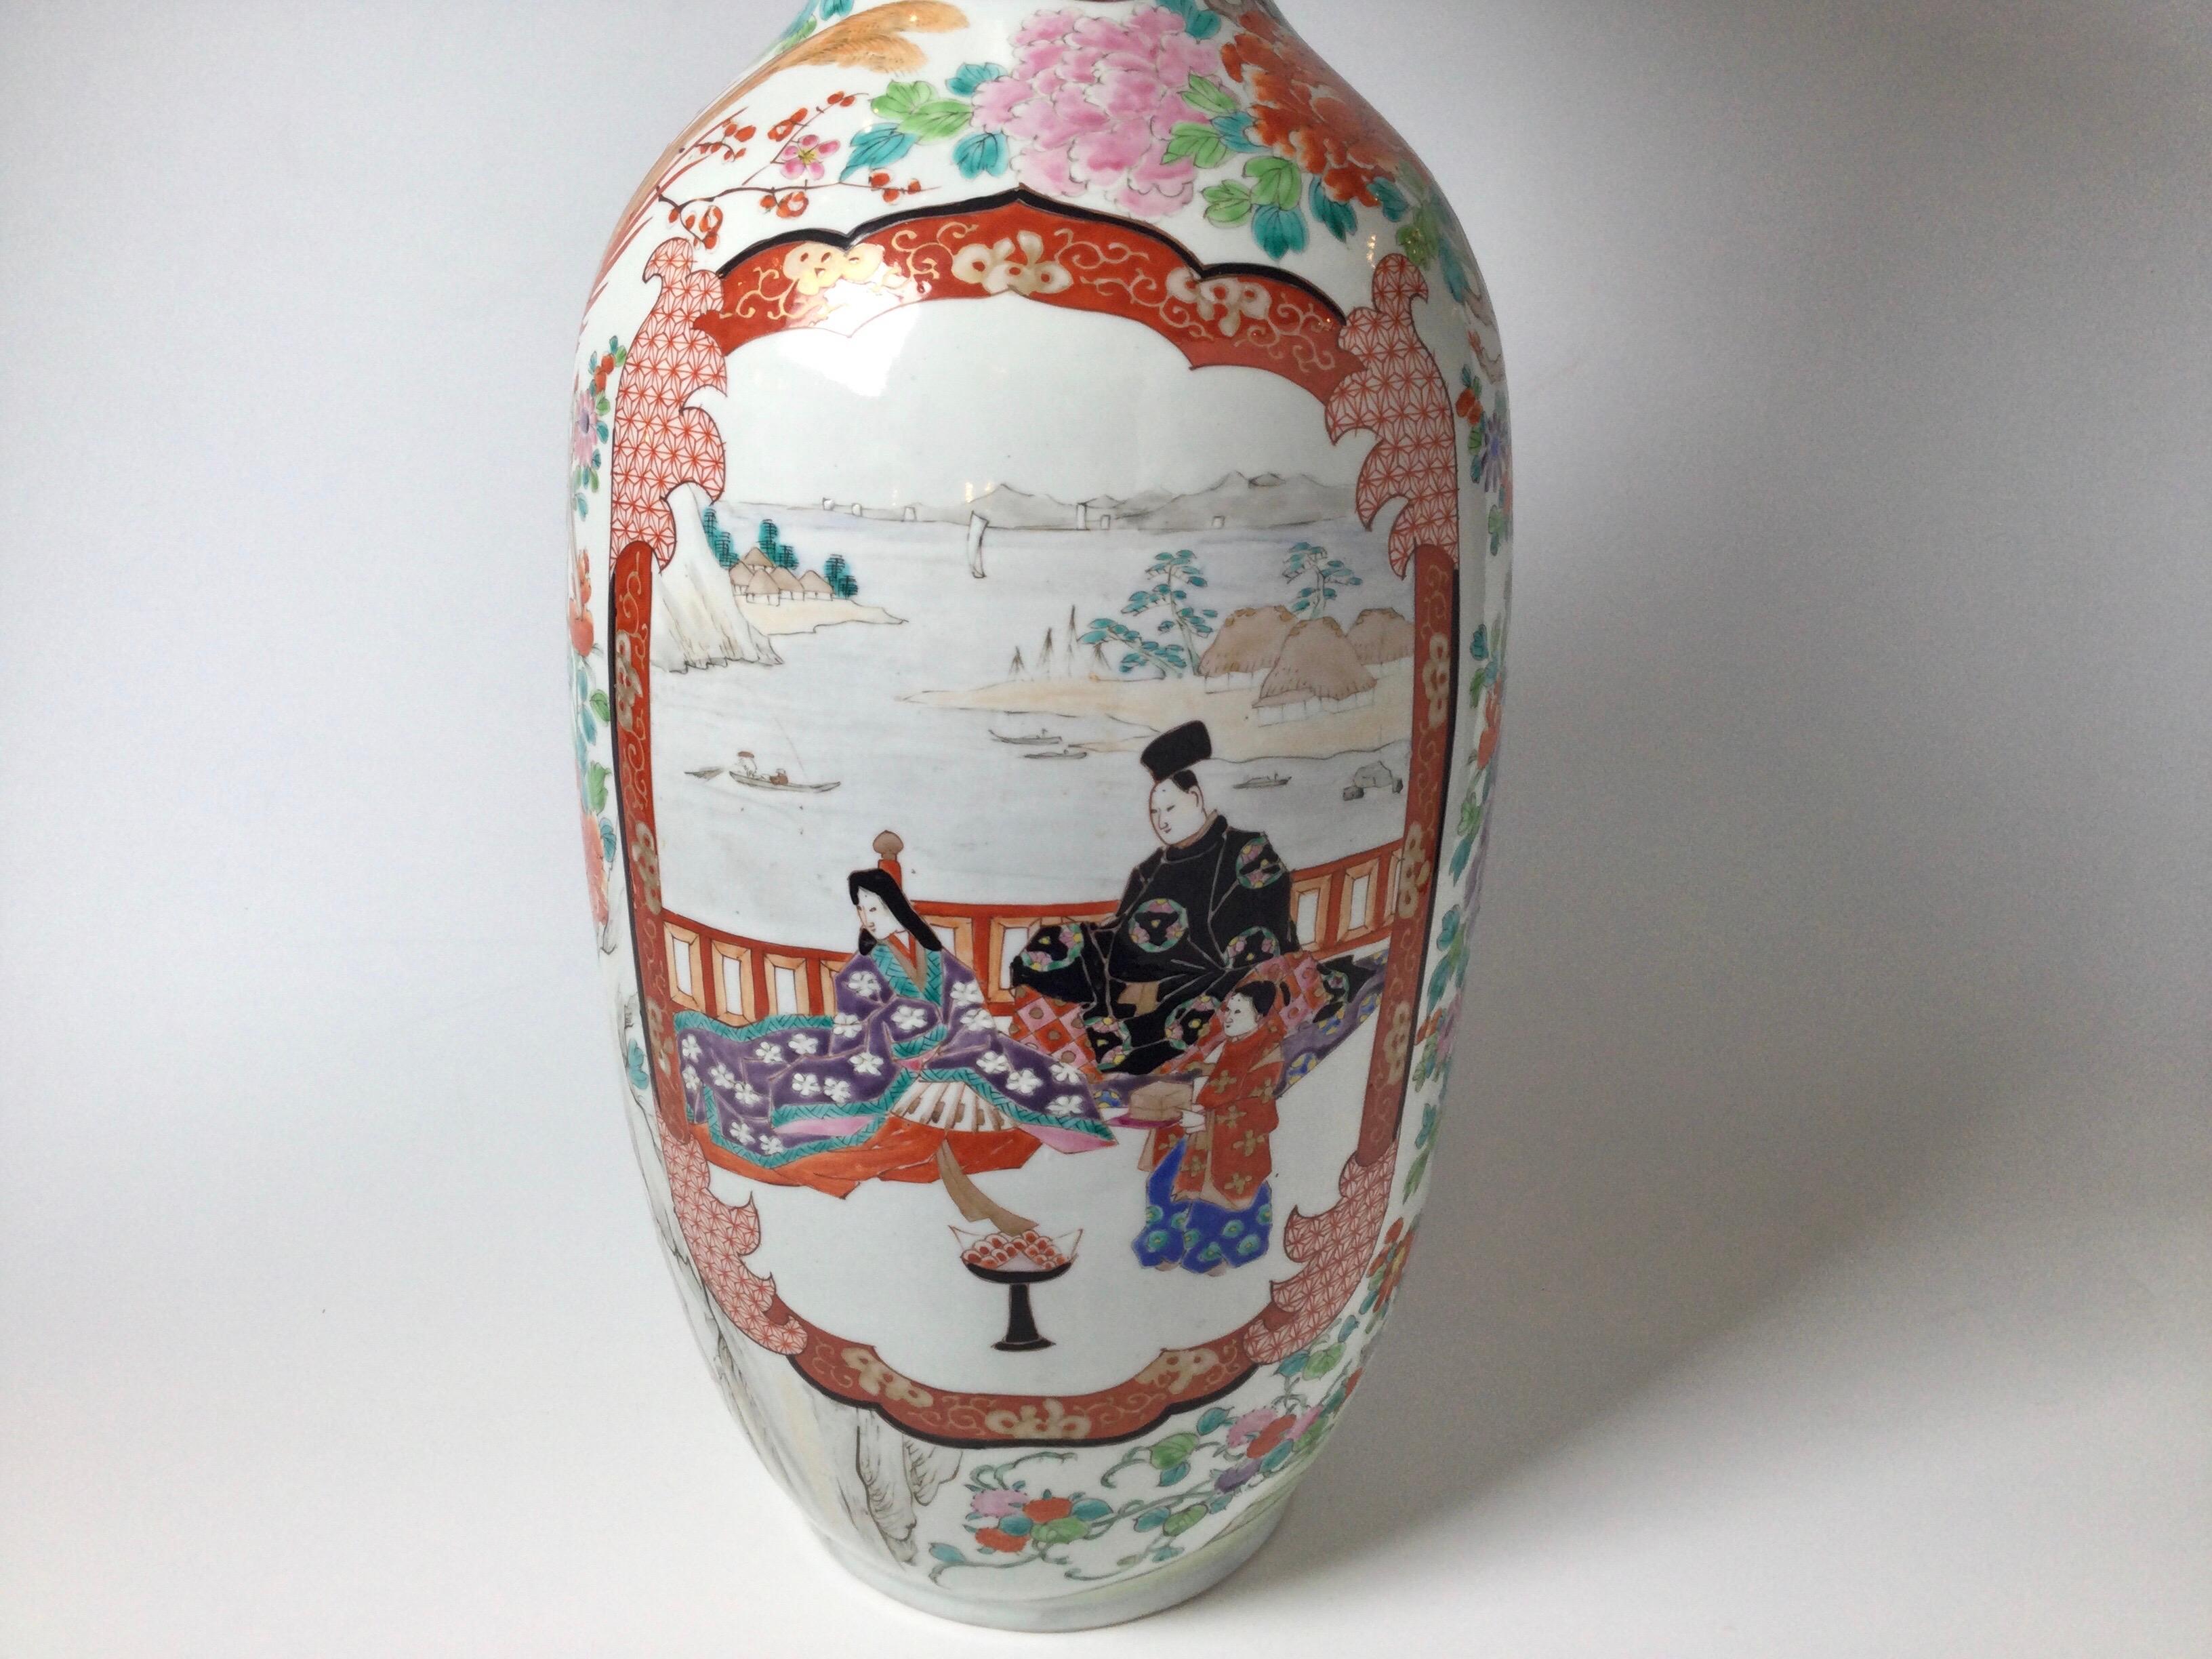 Elegant hand painted Japanese porcelain Kutani Vase, 25.5 inches tall with delicate and crisp hand painted Japanese scenes with the classic iron red accent color. The front cartouches with aristocratic people, with the sides of beautifully painted